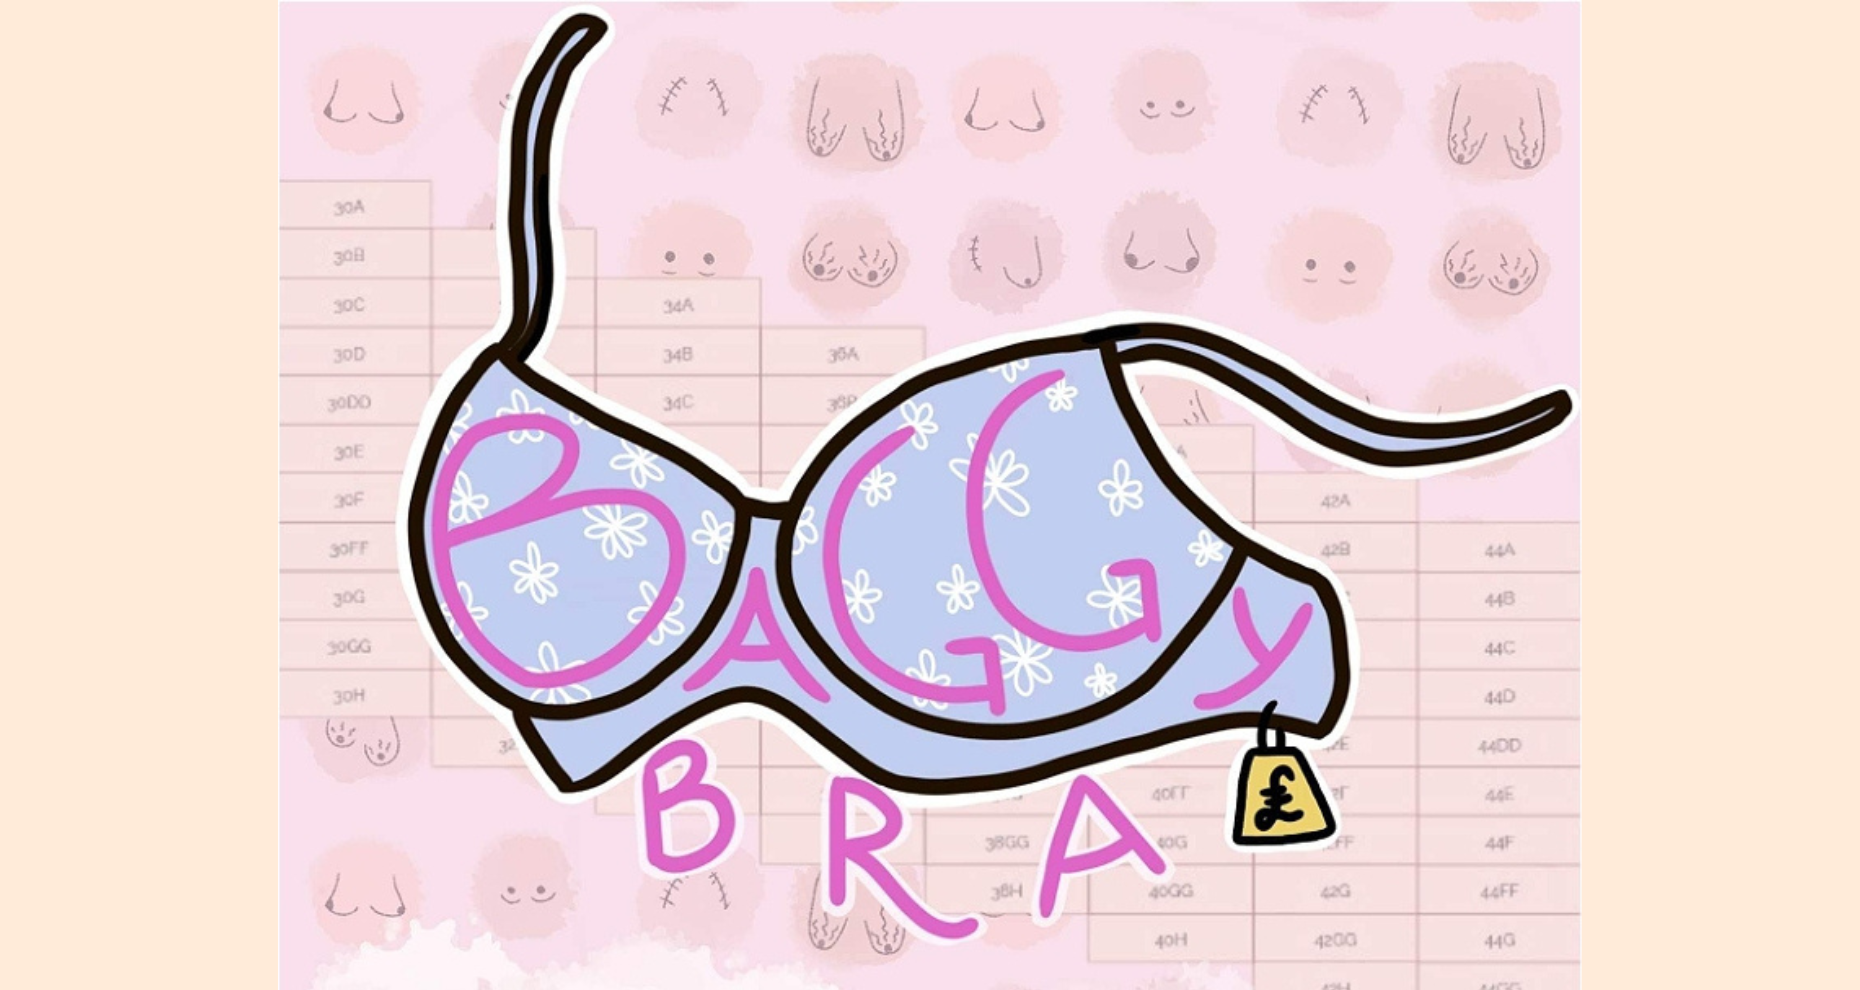 https://everything-theatre.co.uk/wp-content/uploads/2023/04/baggy-bra-bridge-house-theatre.png